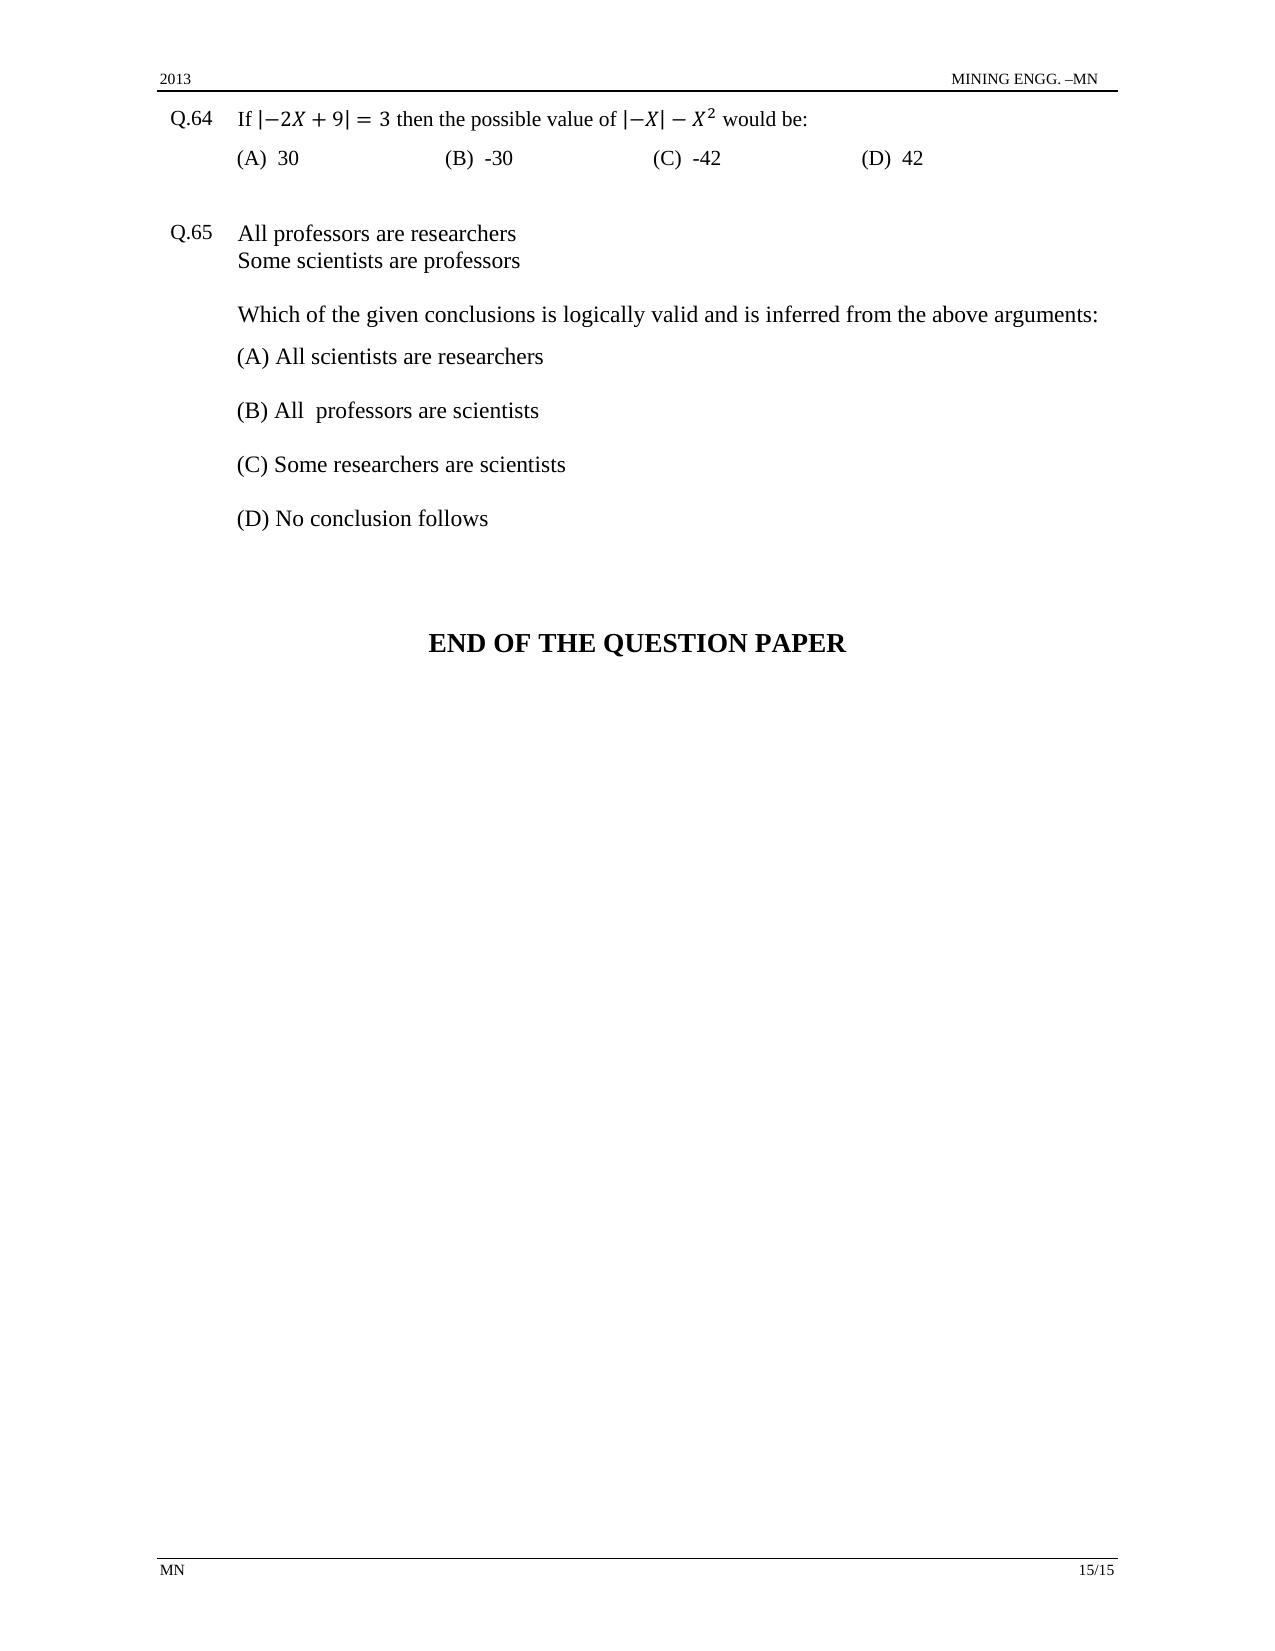 GATE 2013 Mining Engineering (MN) Question Paper with Answer Key - Page 15